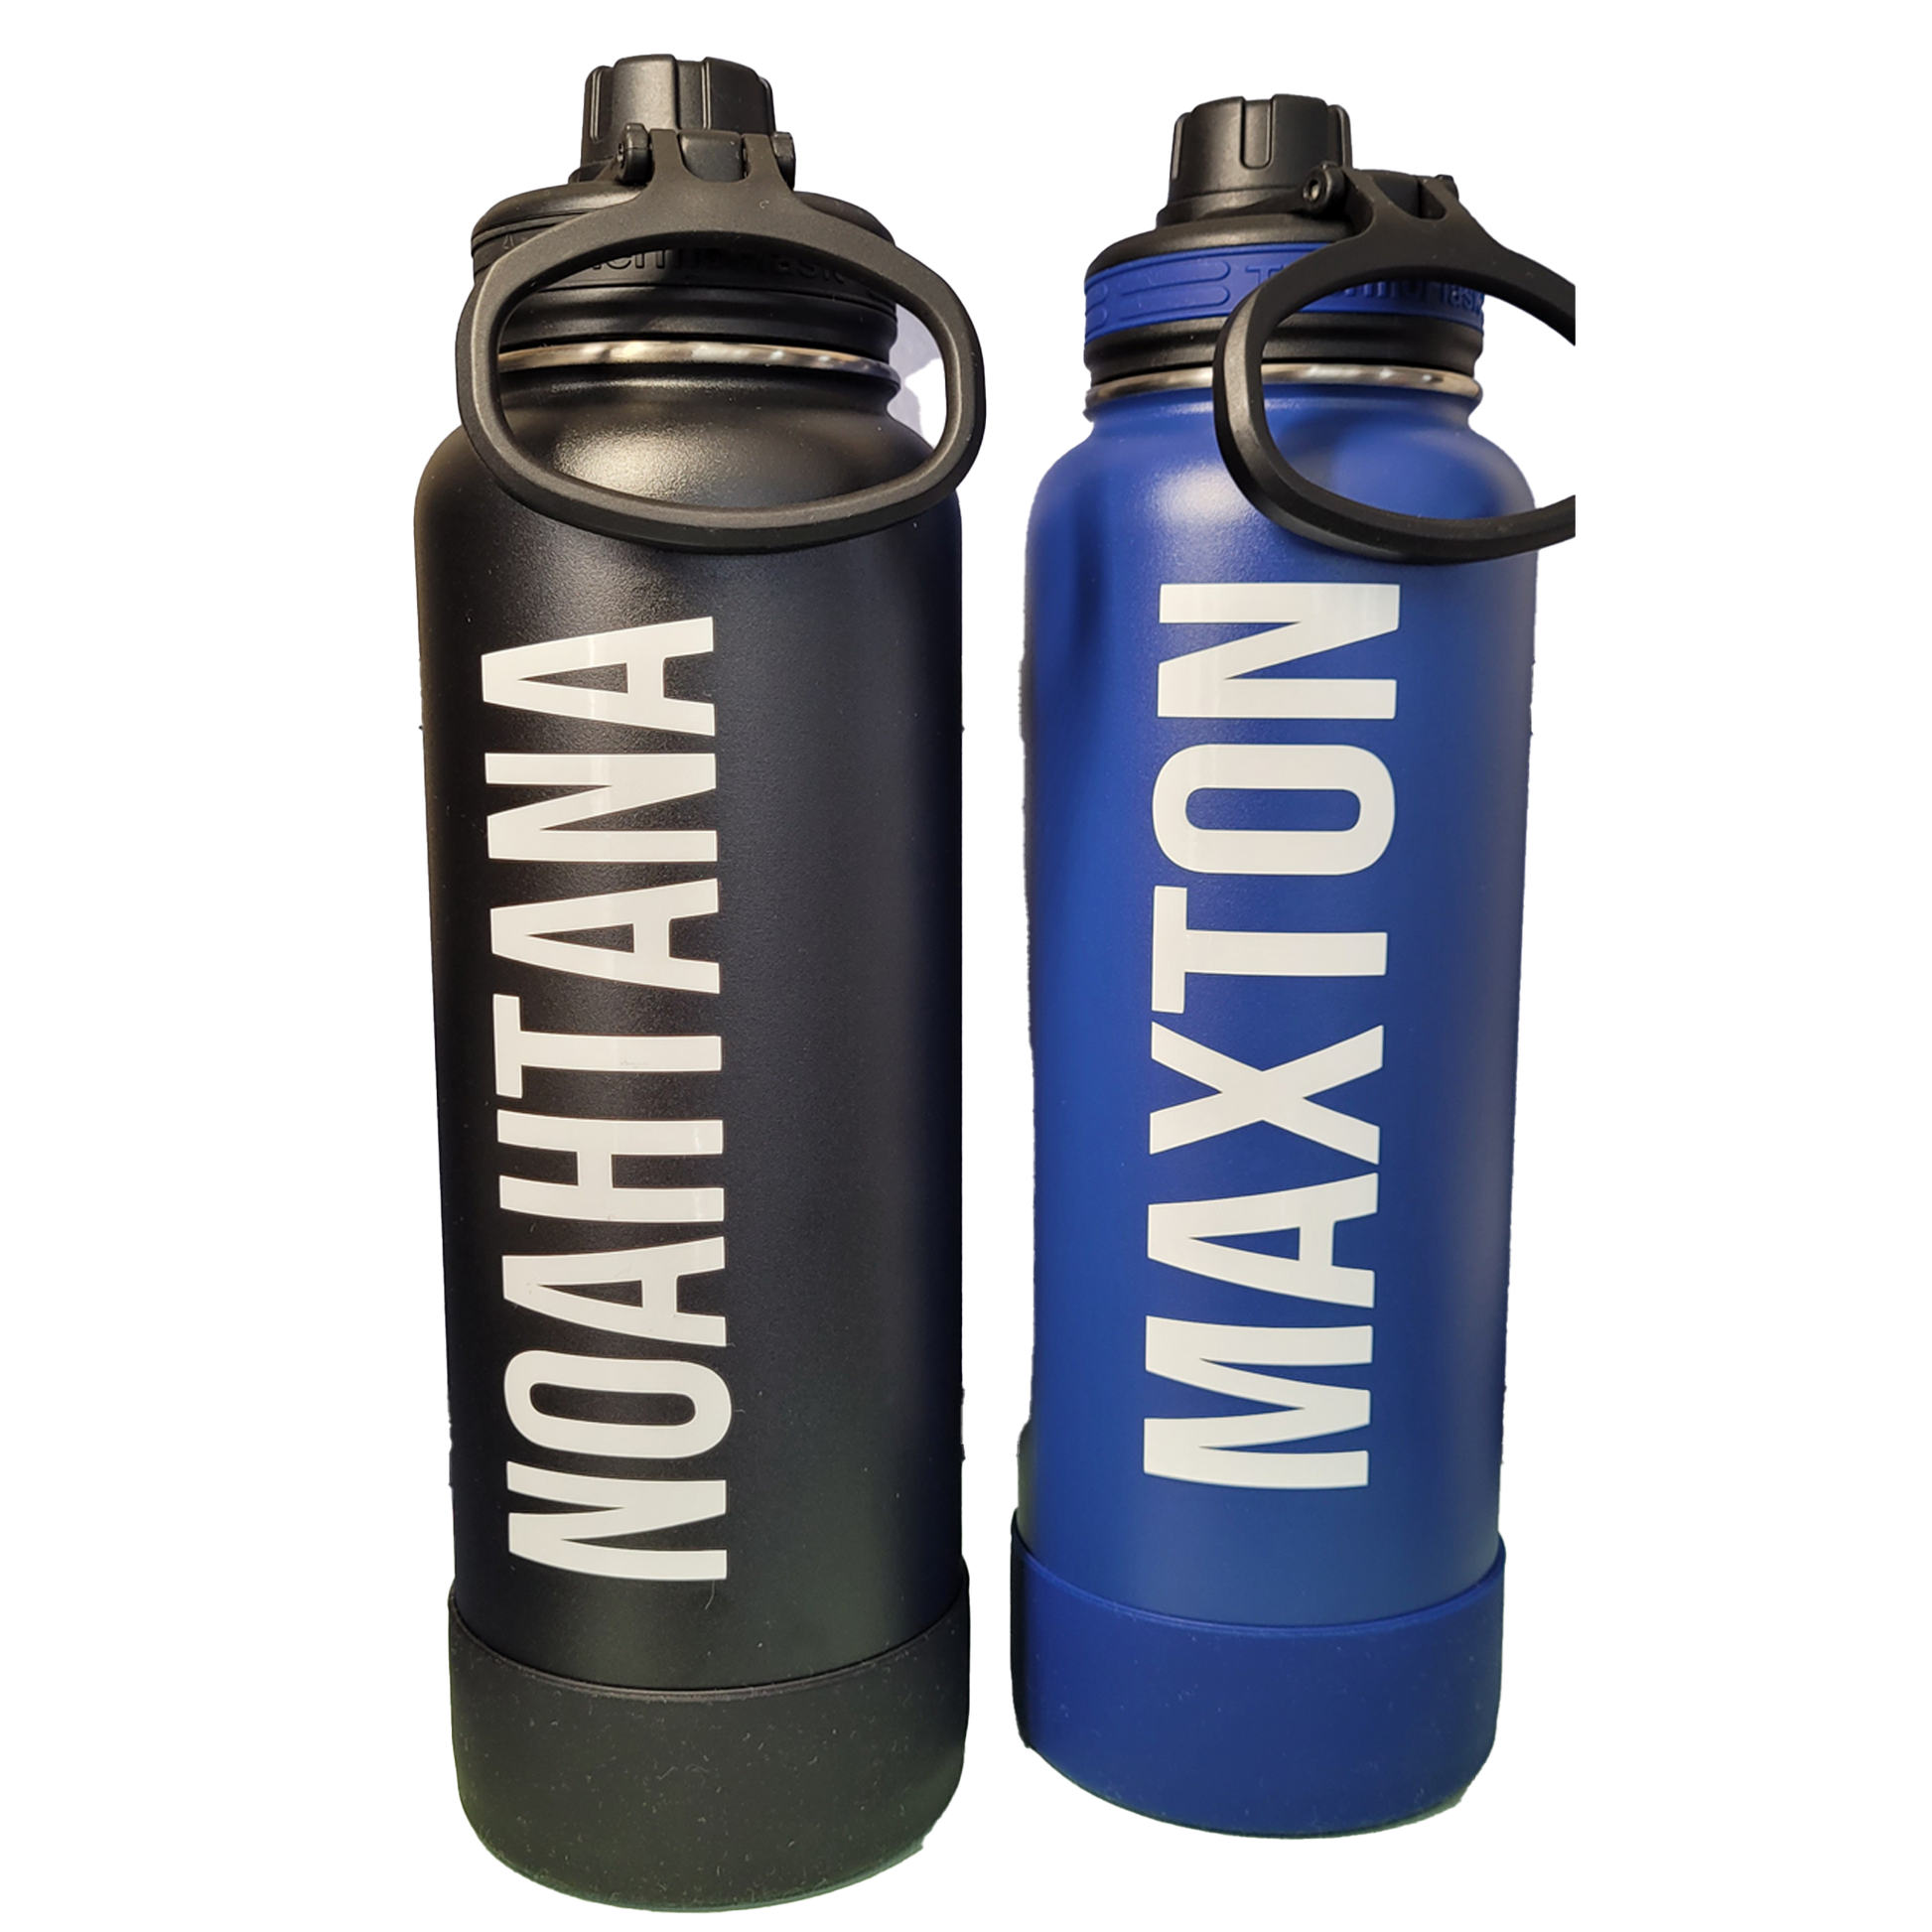 Durable drink bottle labels. can be used for other things too. cars, trucks, boats. easy to apply. comes in many different sizes. matte look and feel. great for kids, and adults.